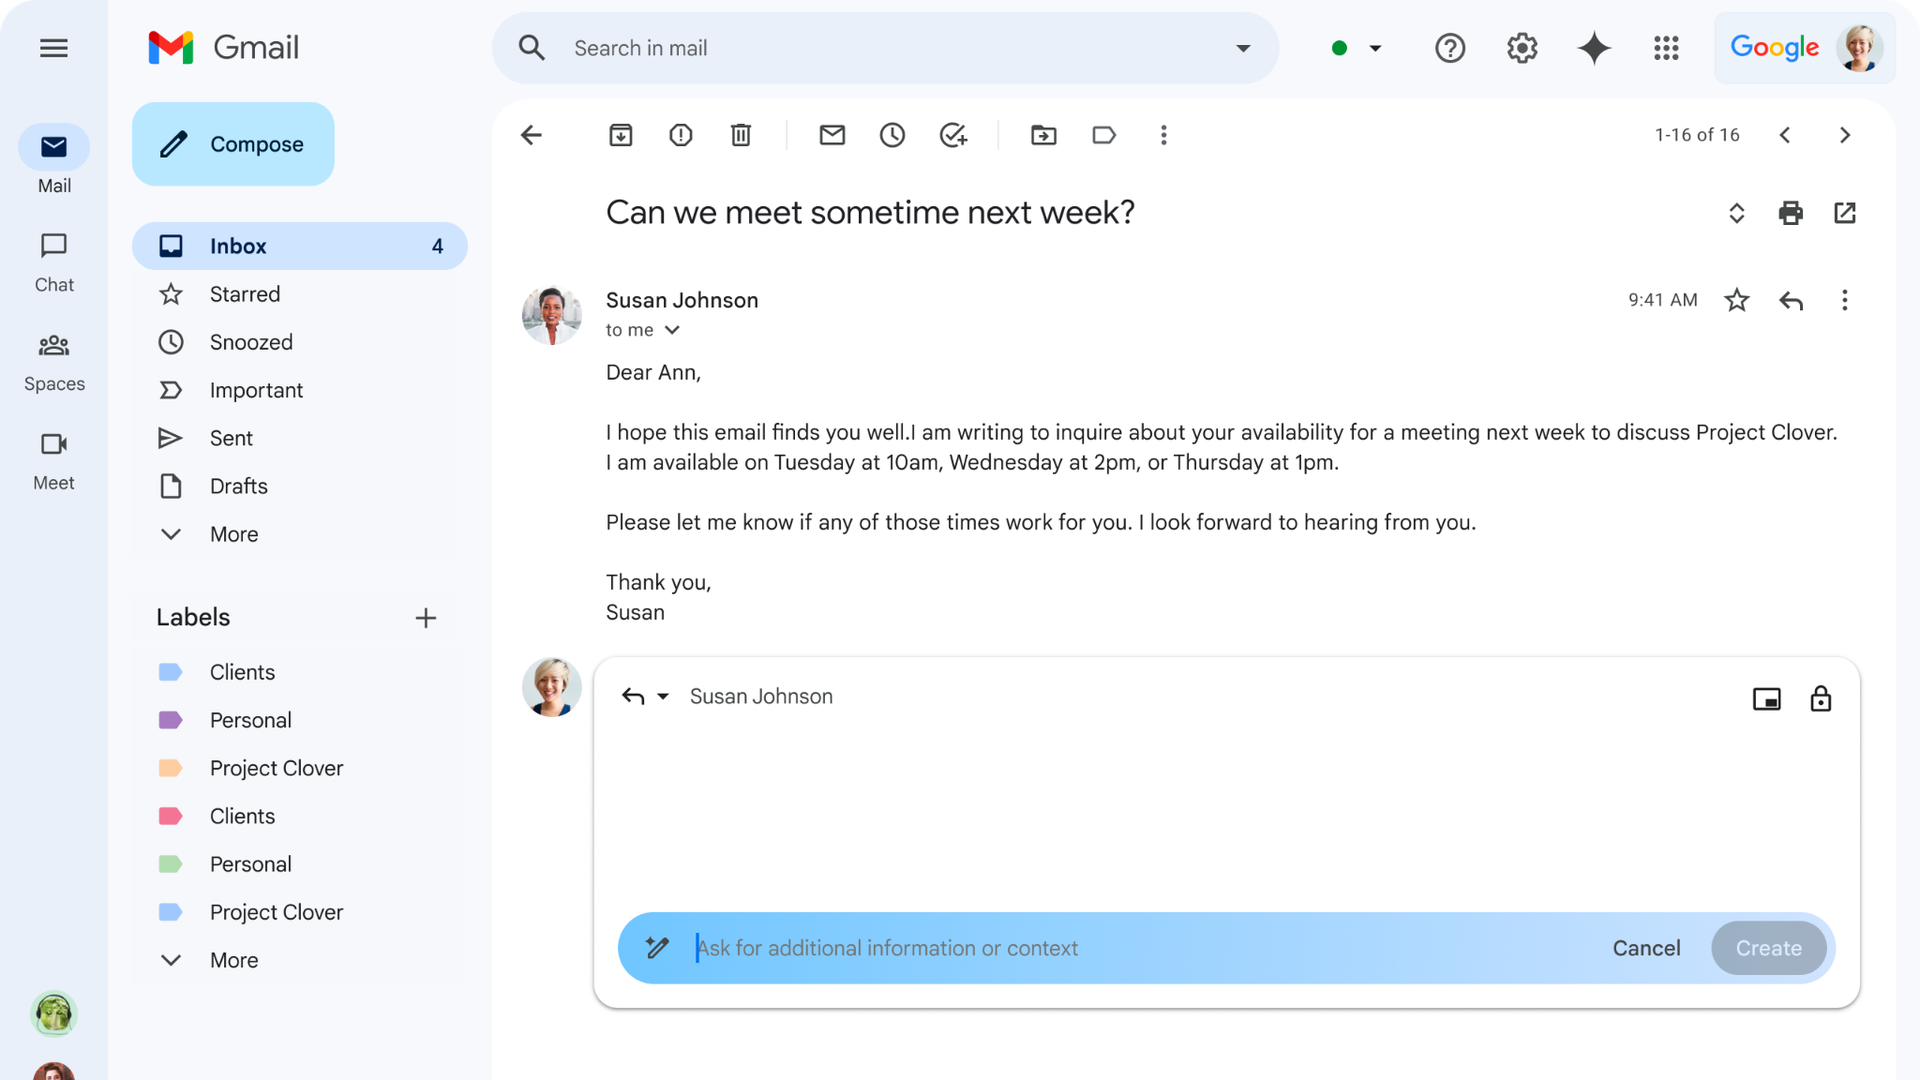 A screenshot of Google's Gemini AI assistant operating within Gmail